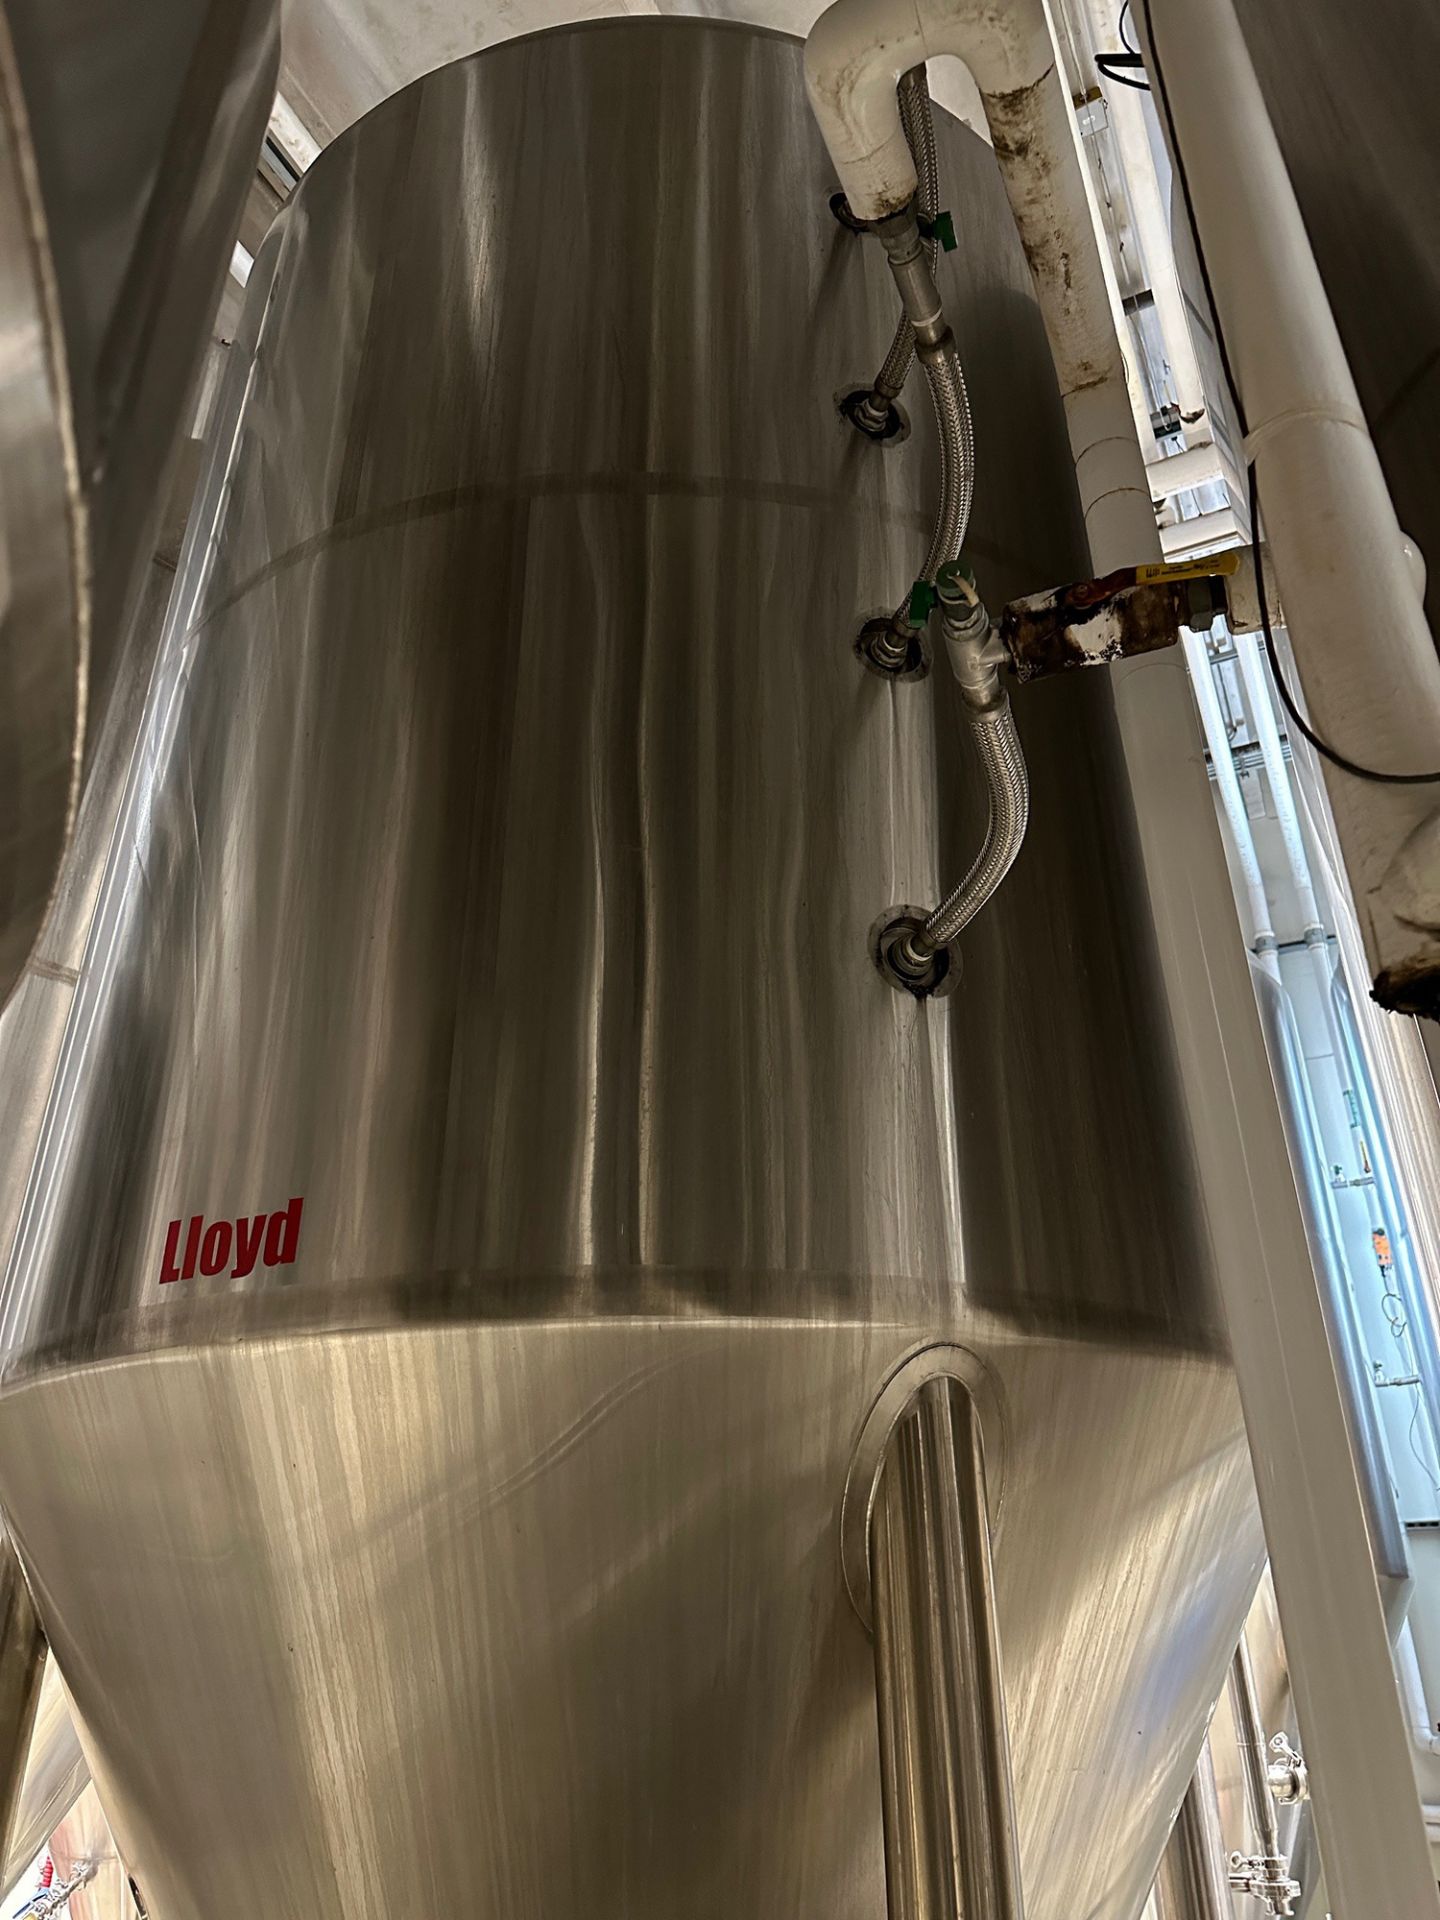 Premier Stainless 80 BBL Stainless Steel Fermentation Tank - Cone Bottom, Glycol Ja | Rig Fee $1850 - Image 2 of 2